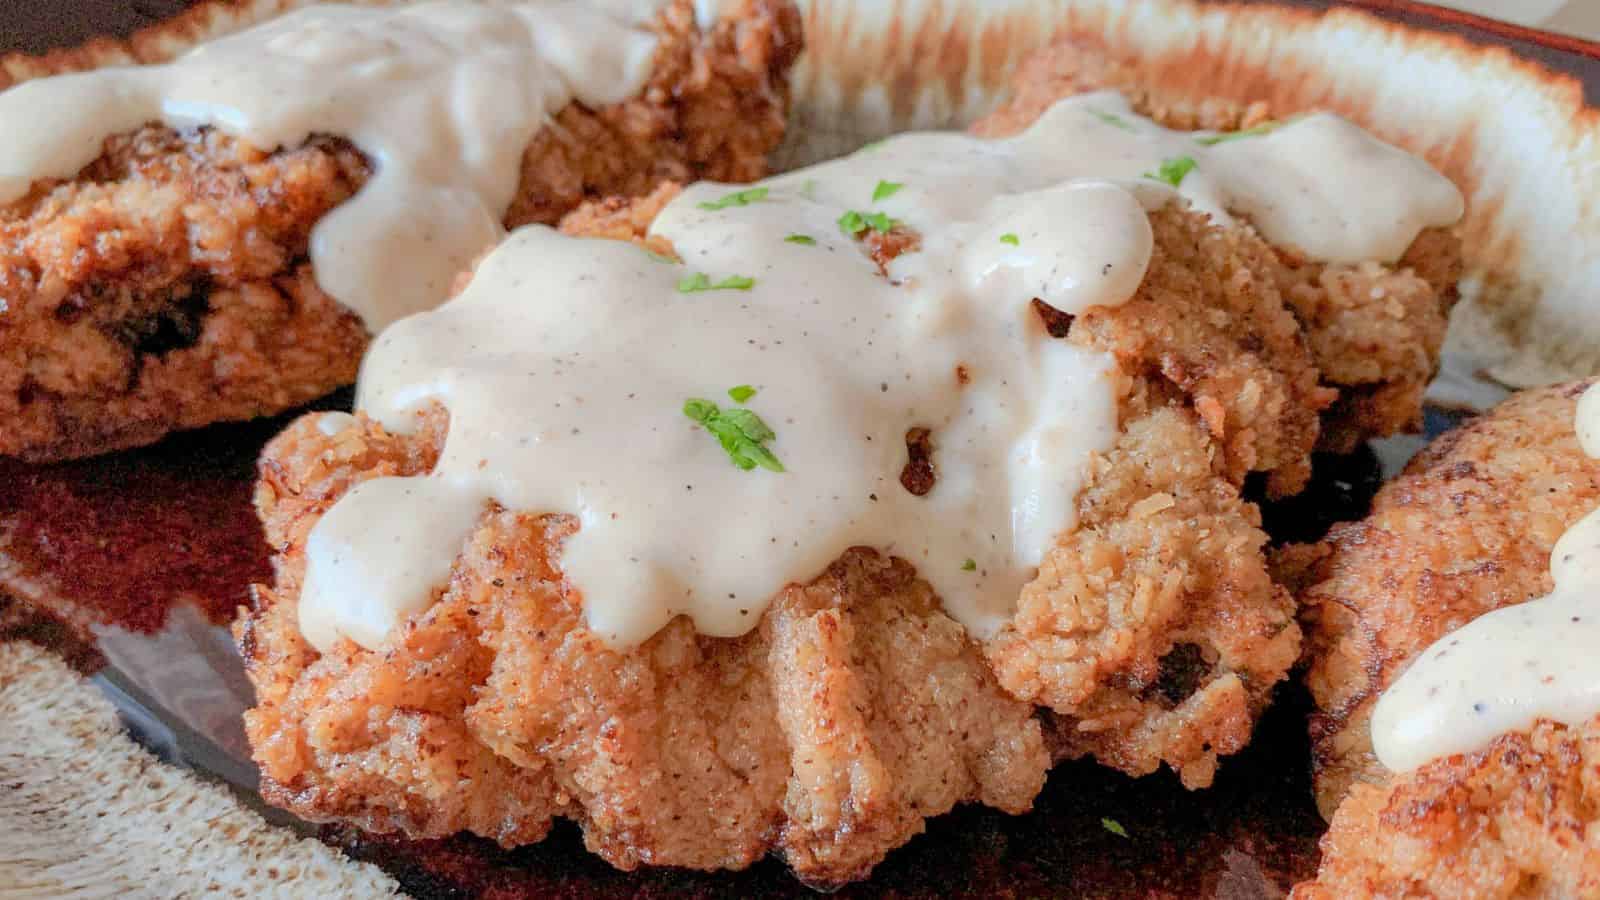 Country fried steaks on a platter smothered in white gravy.